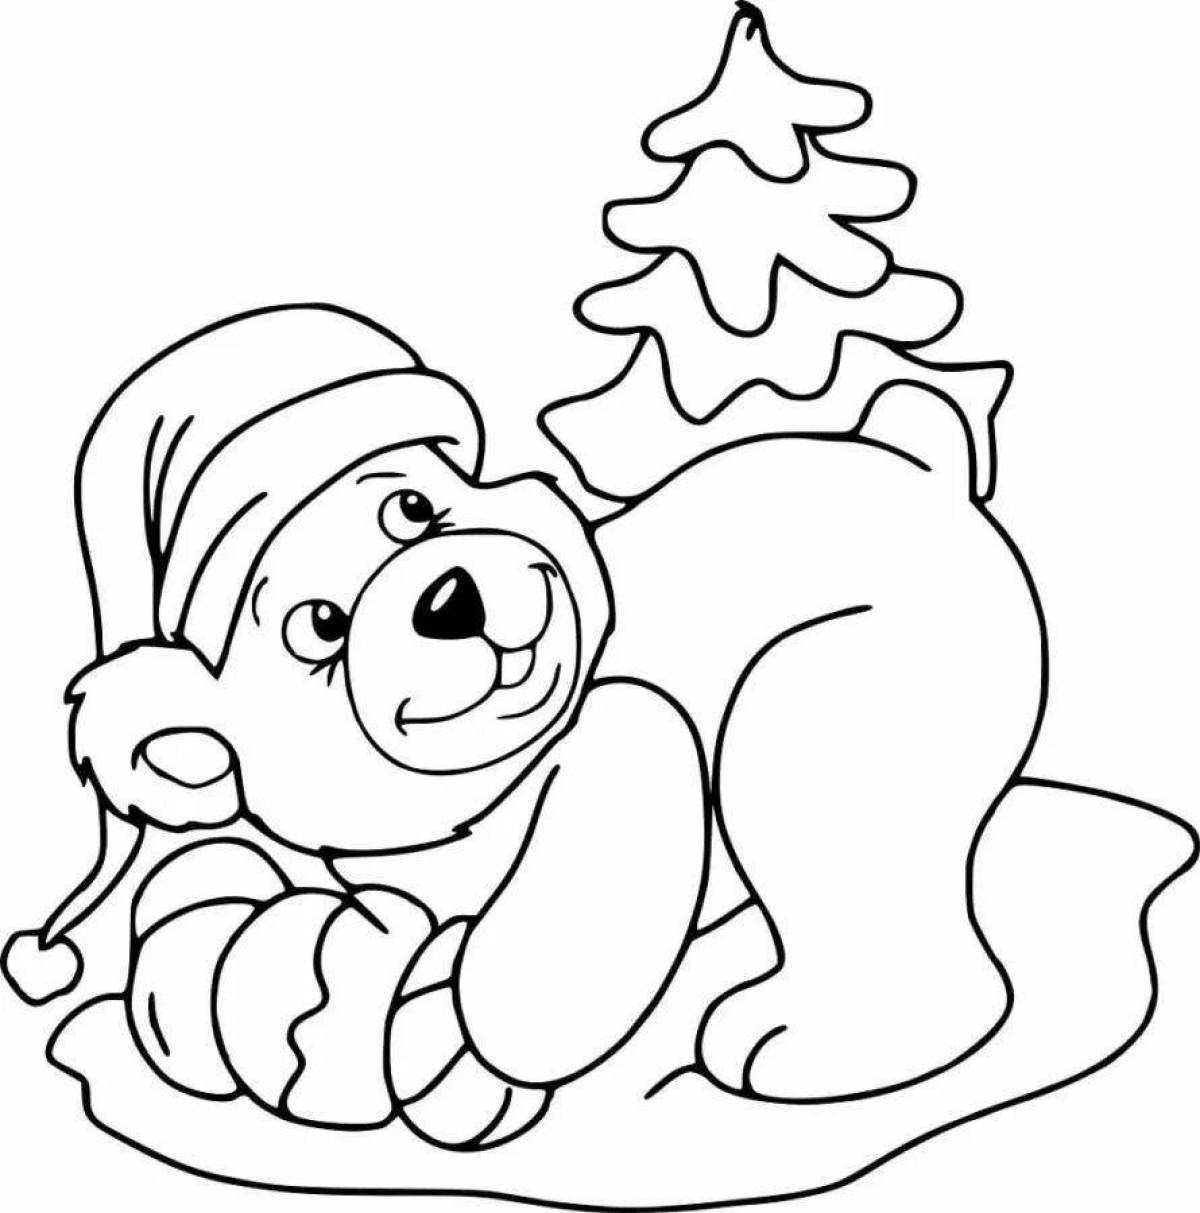 Amazing winter animal coloring pages for 3-4 year olds